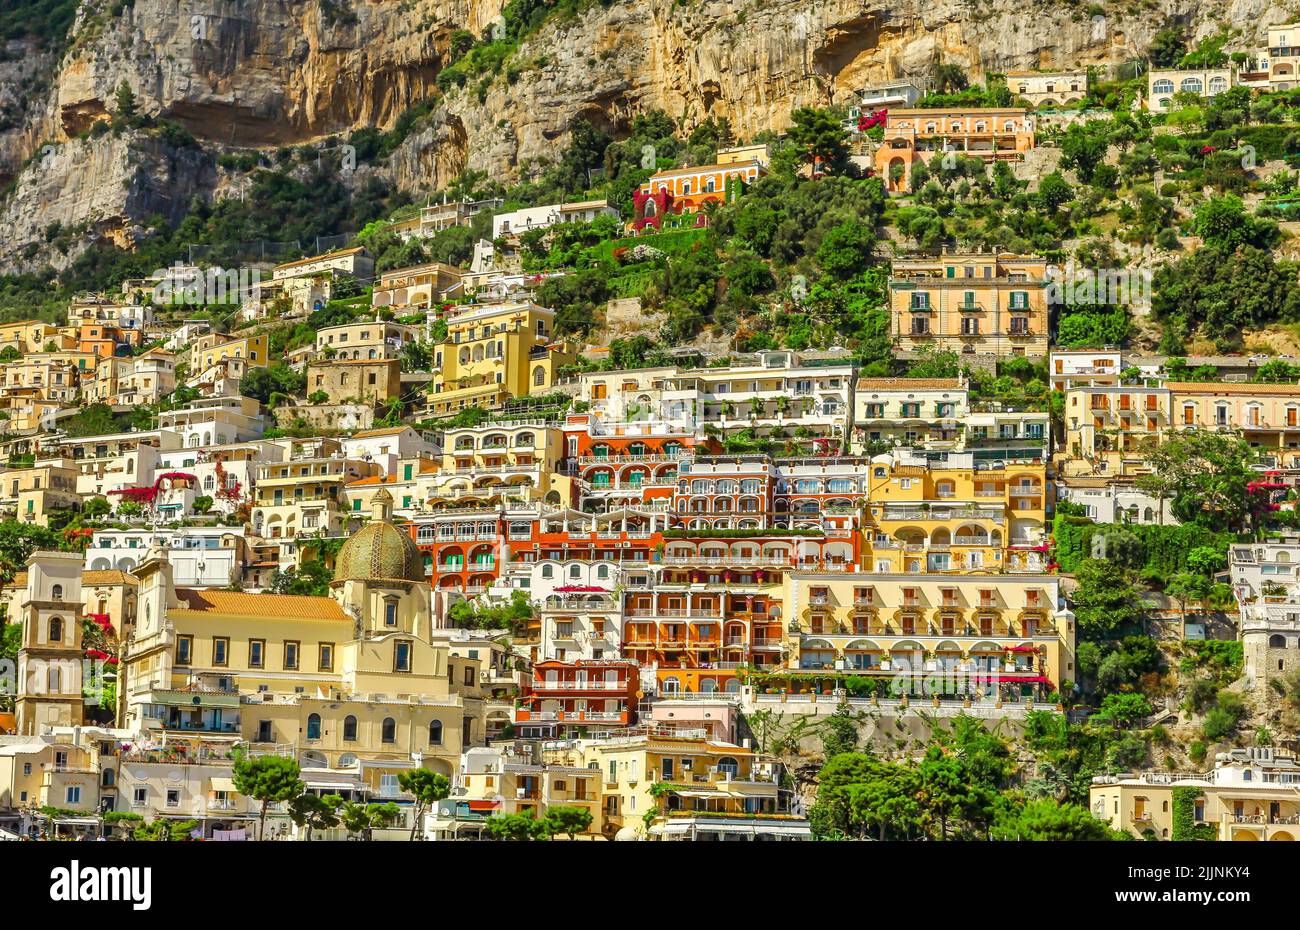 An aerial view of the hillside town of Positano on the Amalfi coast ...